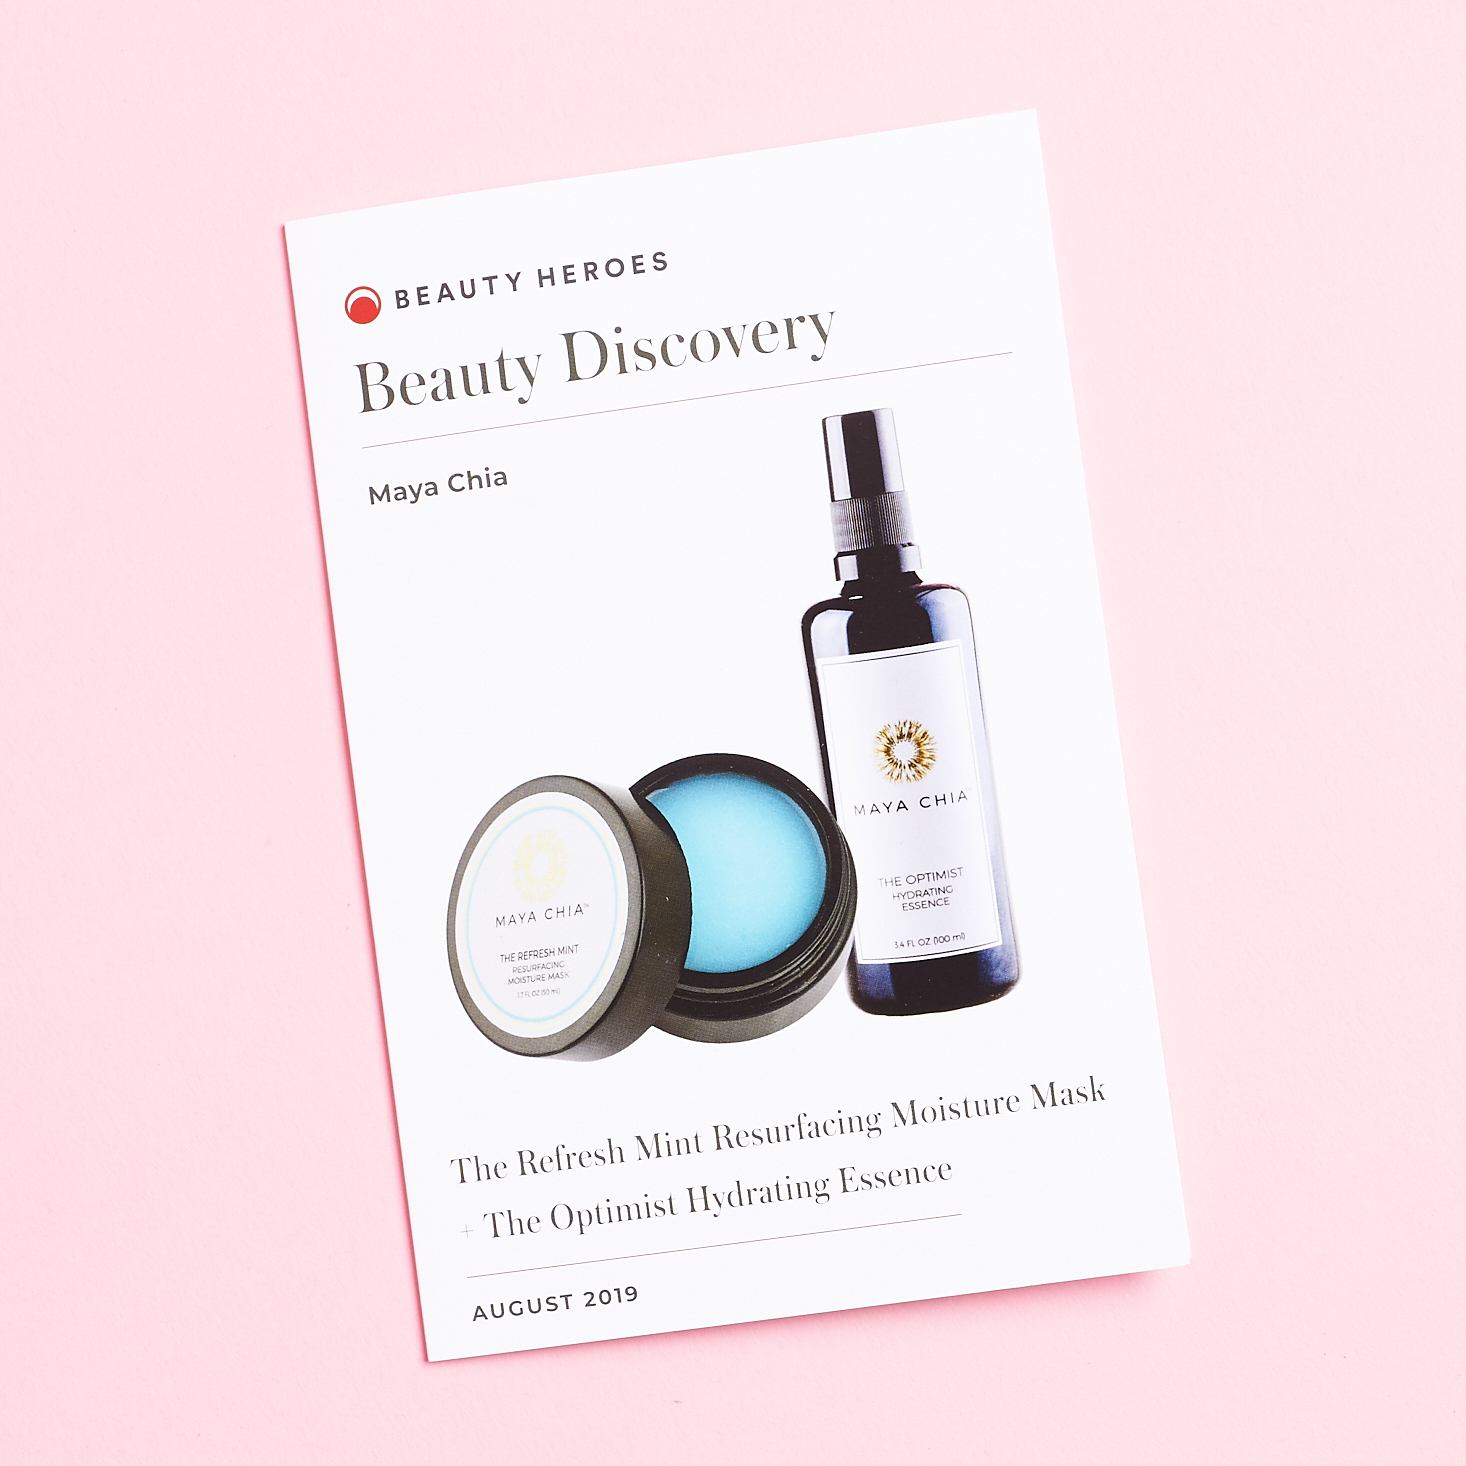 Beauty Heroes Info pamphlet for Maya Chia